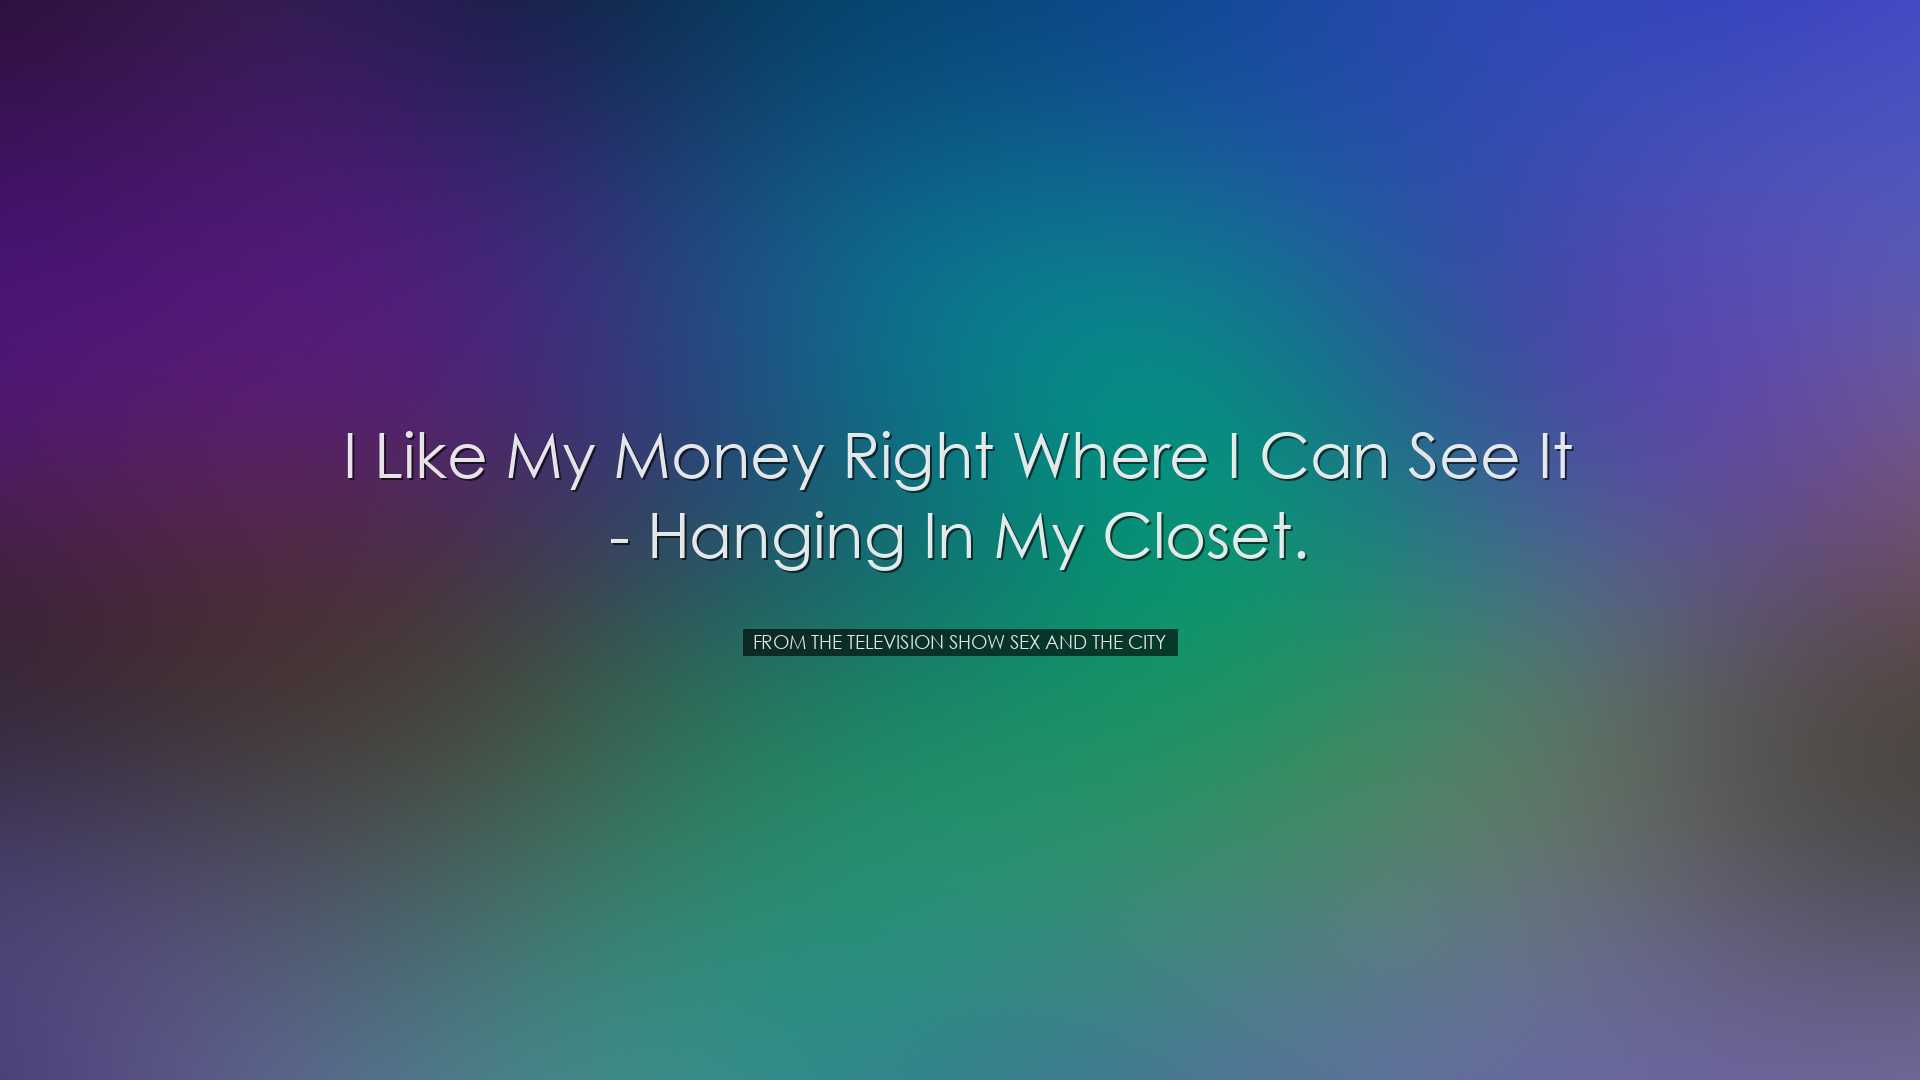 I like my money right where I can see it - hanging in my closet. -